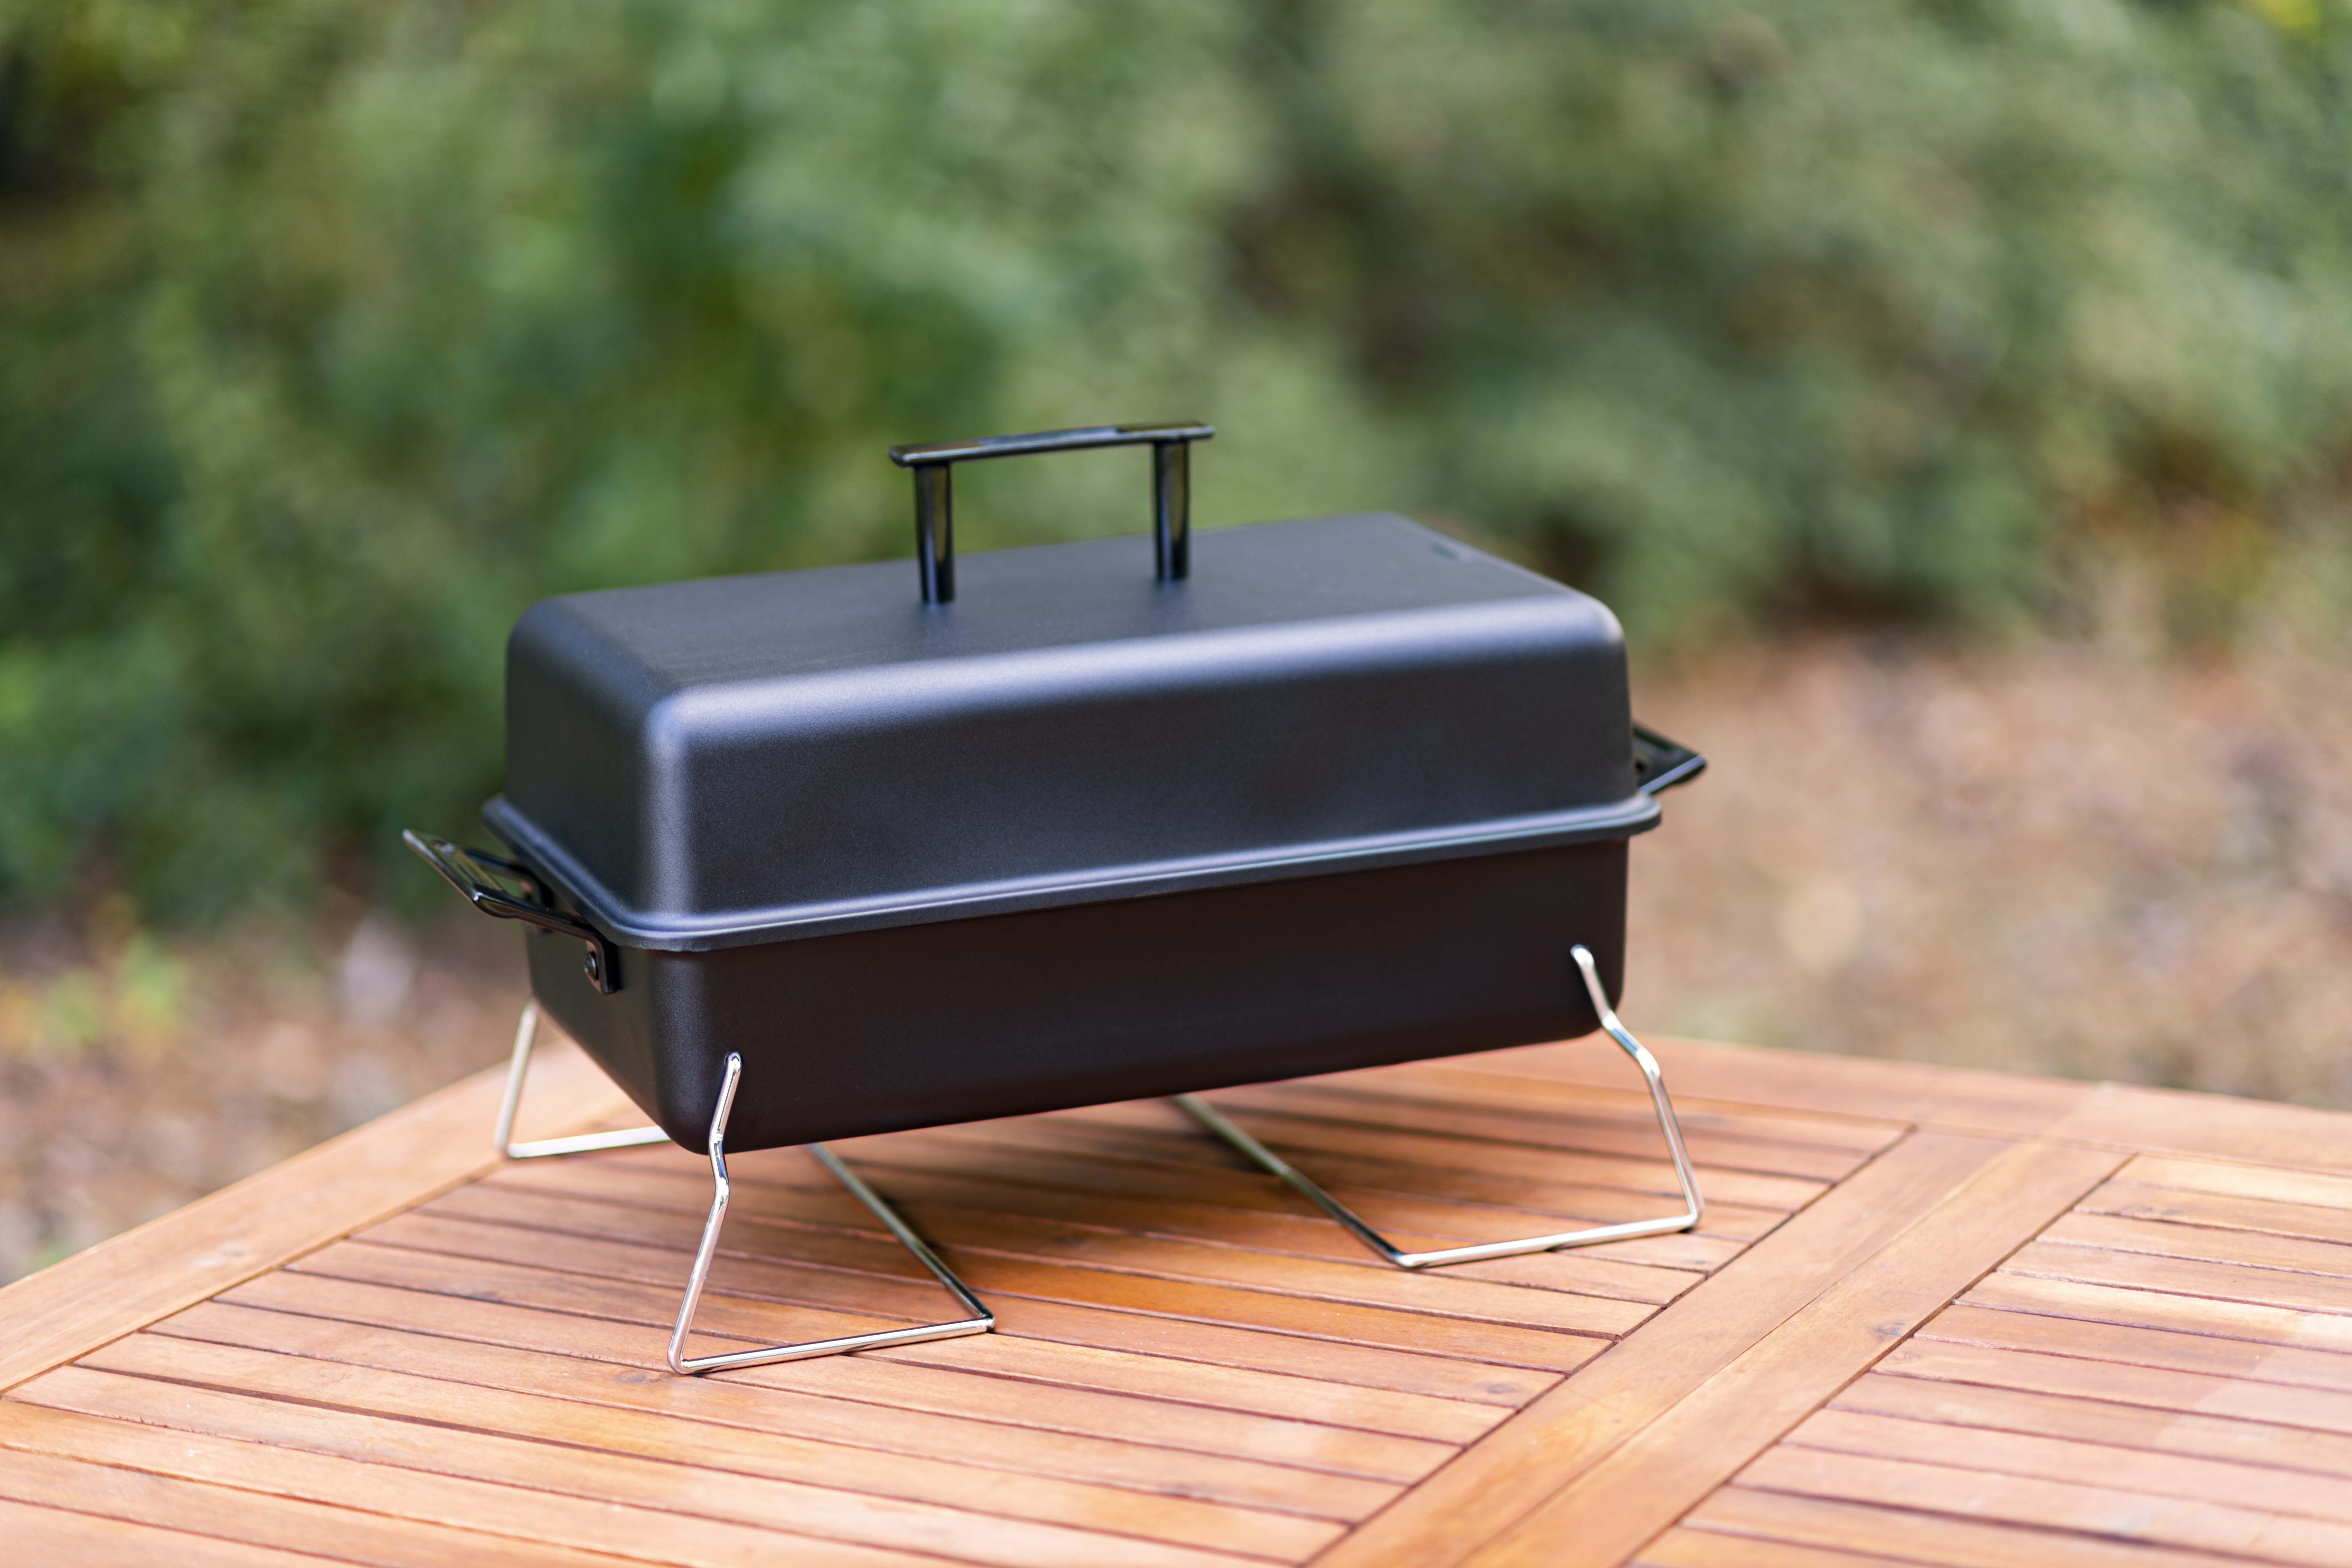 Char-Broil 190 Portable Tabletop Charcoal Grill- Black - image 3 of 8